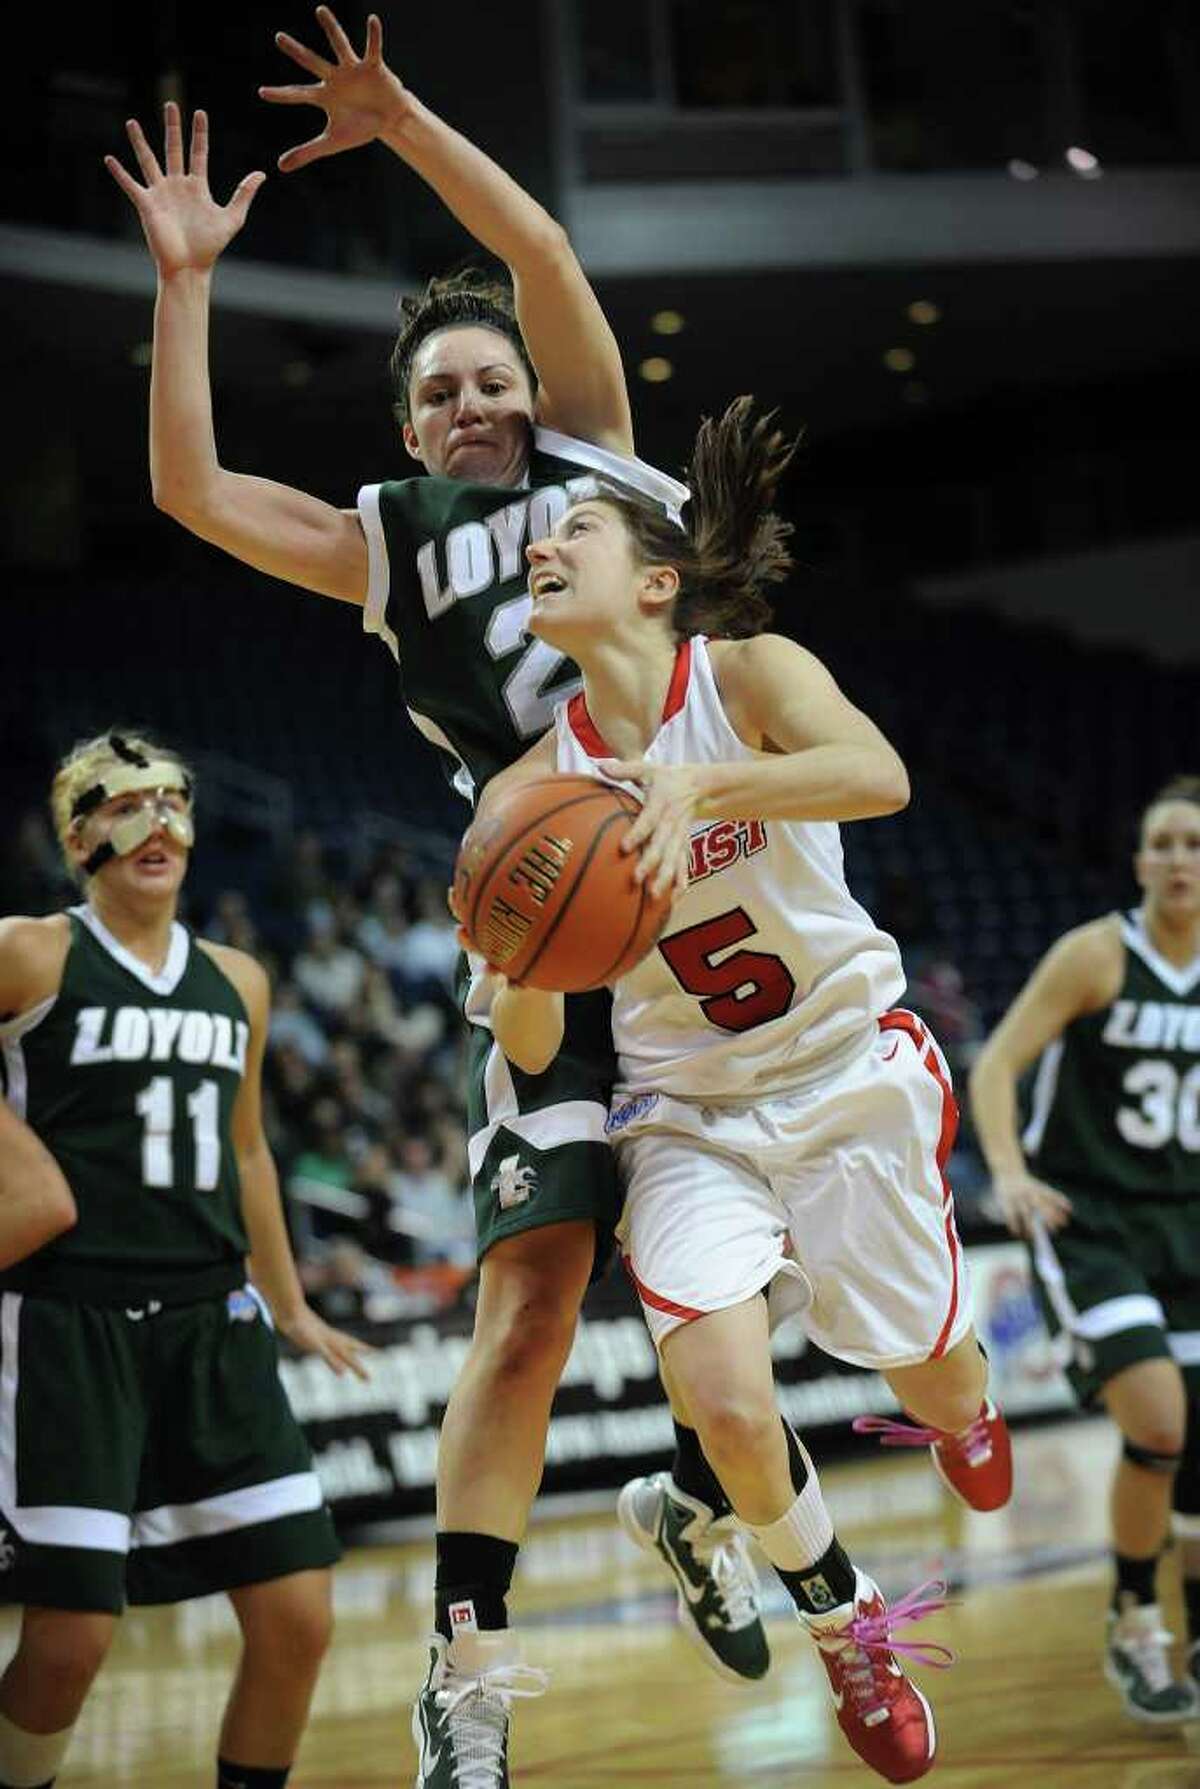 Marist's Elise Caron drives to the basket while being defended by Loyola's Katie Sheahin in the finals of the MAAC conference tournament at the Webster Bank Arena at Harbor Yard in Bridgeport on Monday, March 7, 2011. Marist won the game 63-45.